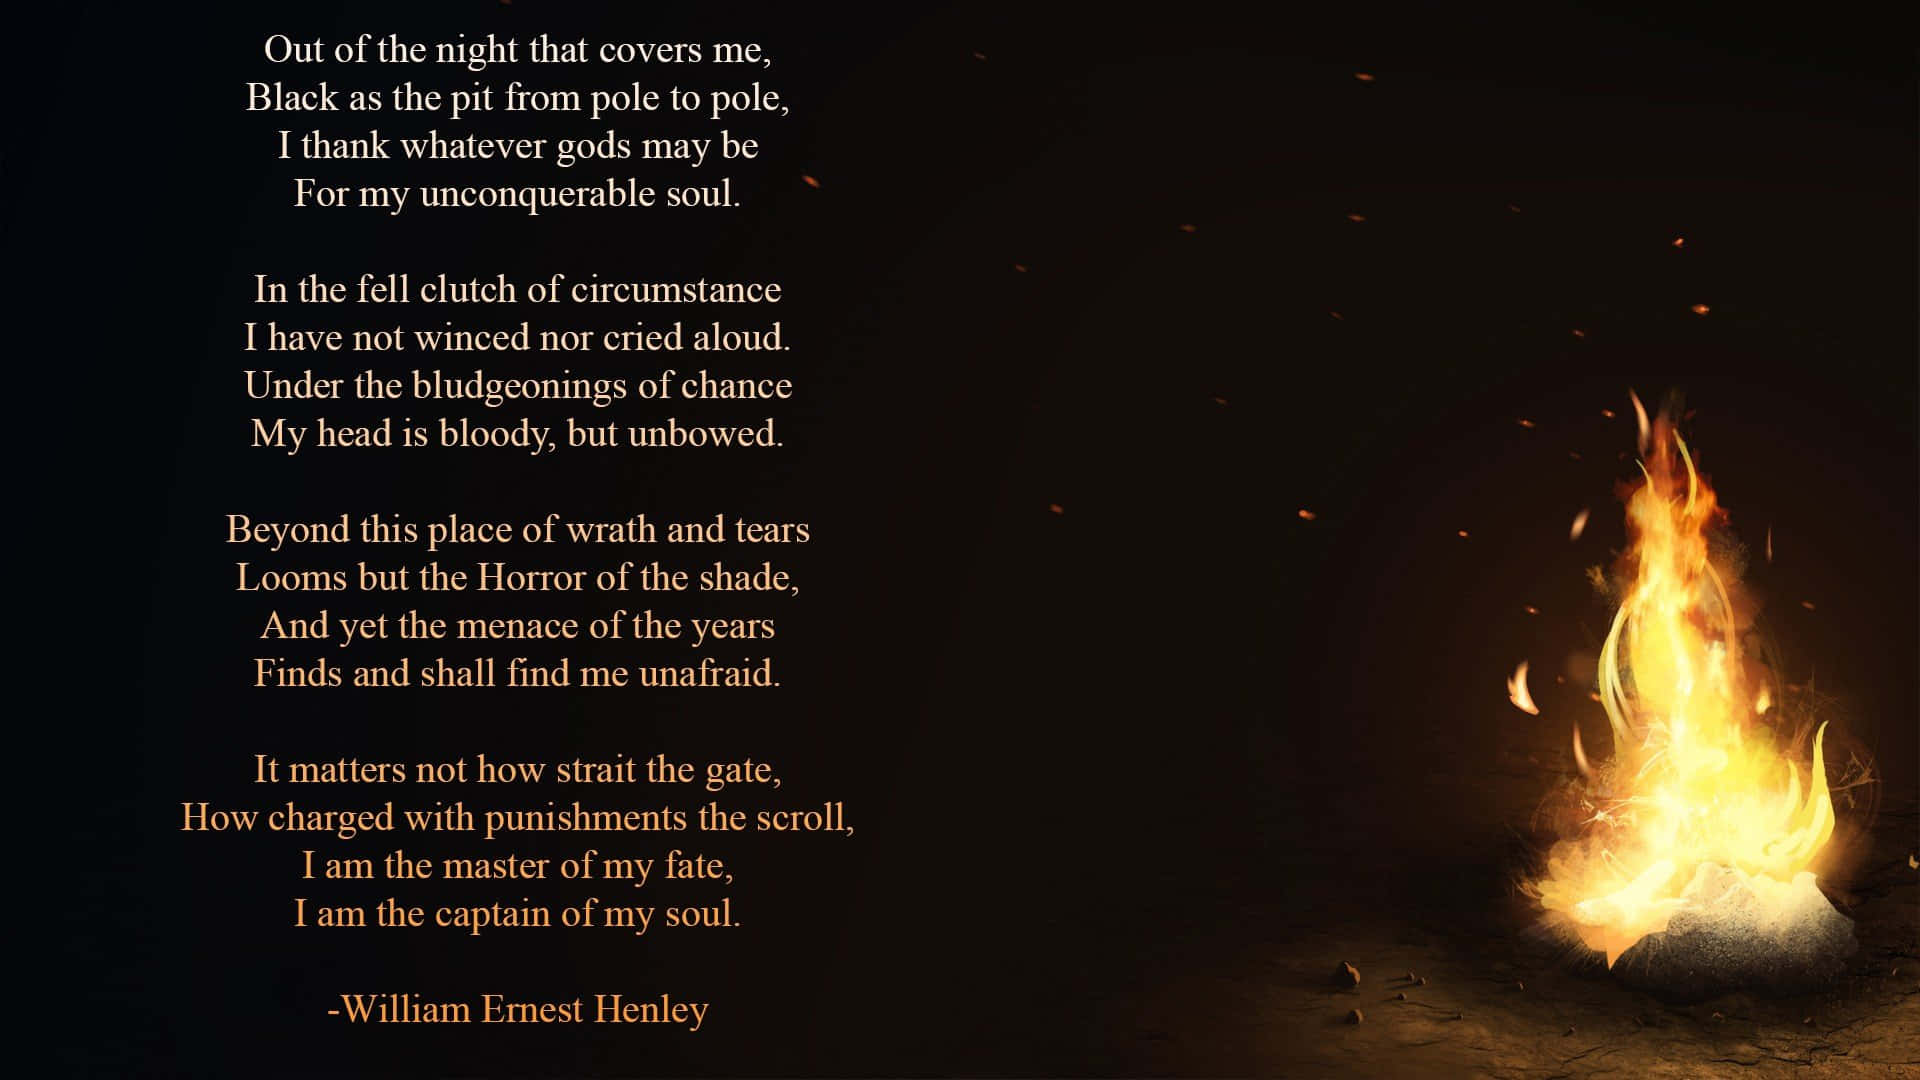 Henley Poem With A Fire Wallpaper